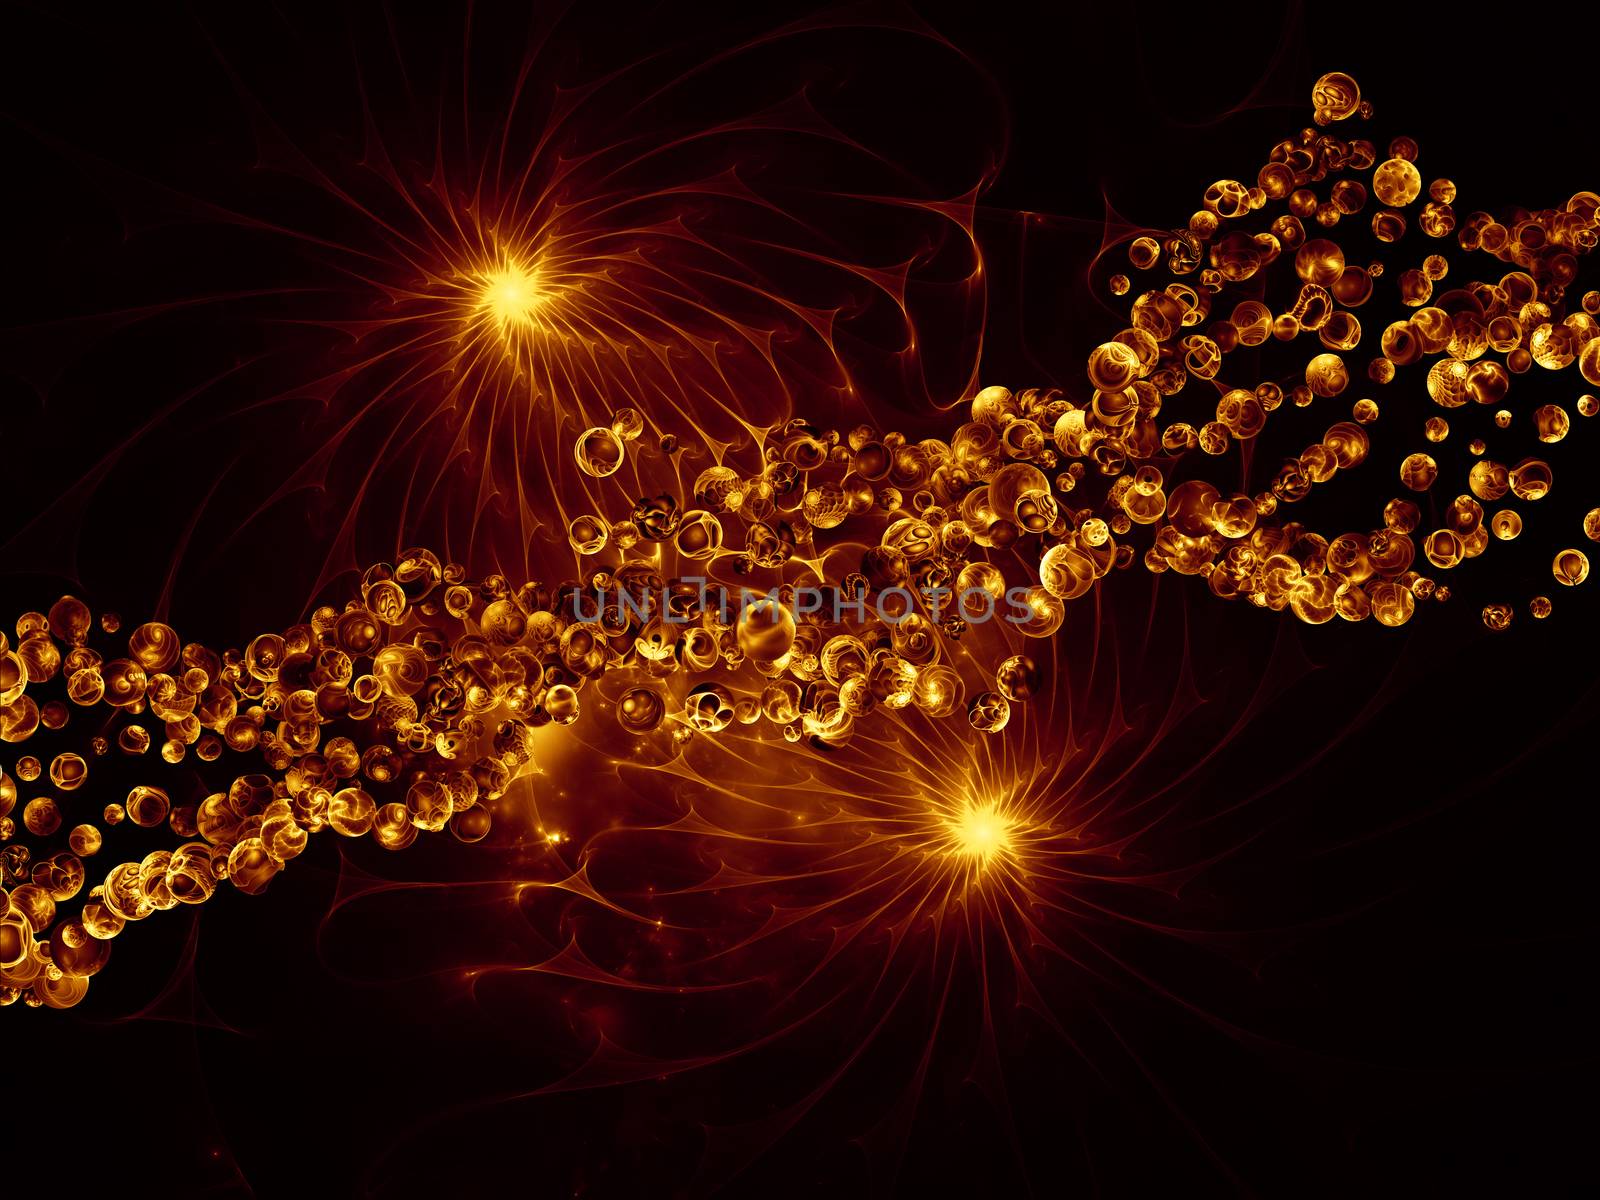 Molecular Dreams series. Artistic background made of conceptual atoms, molecules and fractal elements for use with projects on biology, chemistry, technology, science and education